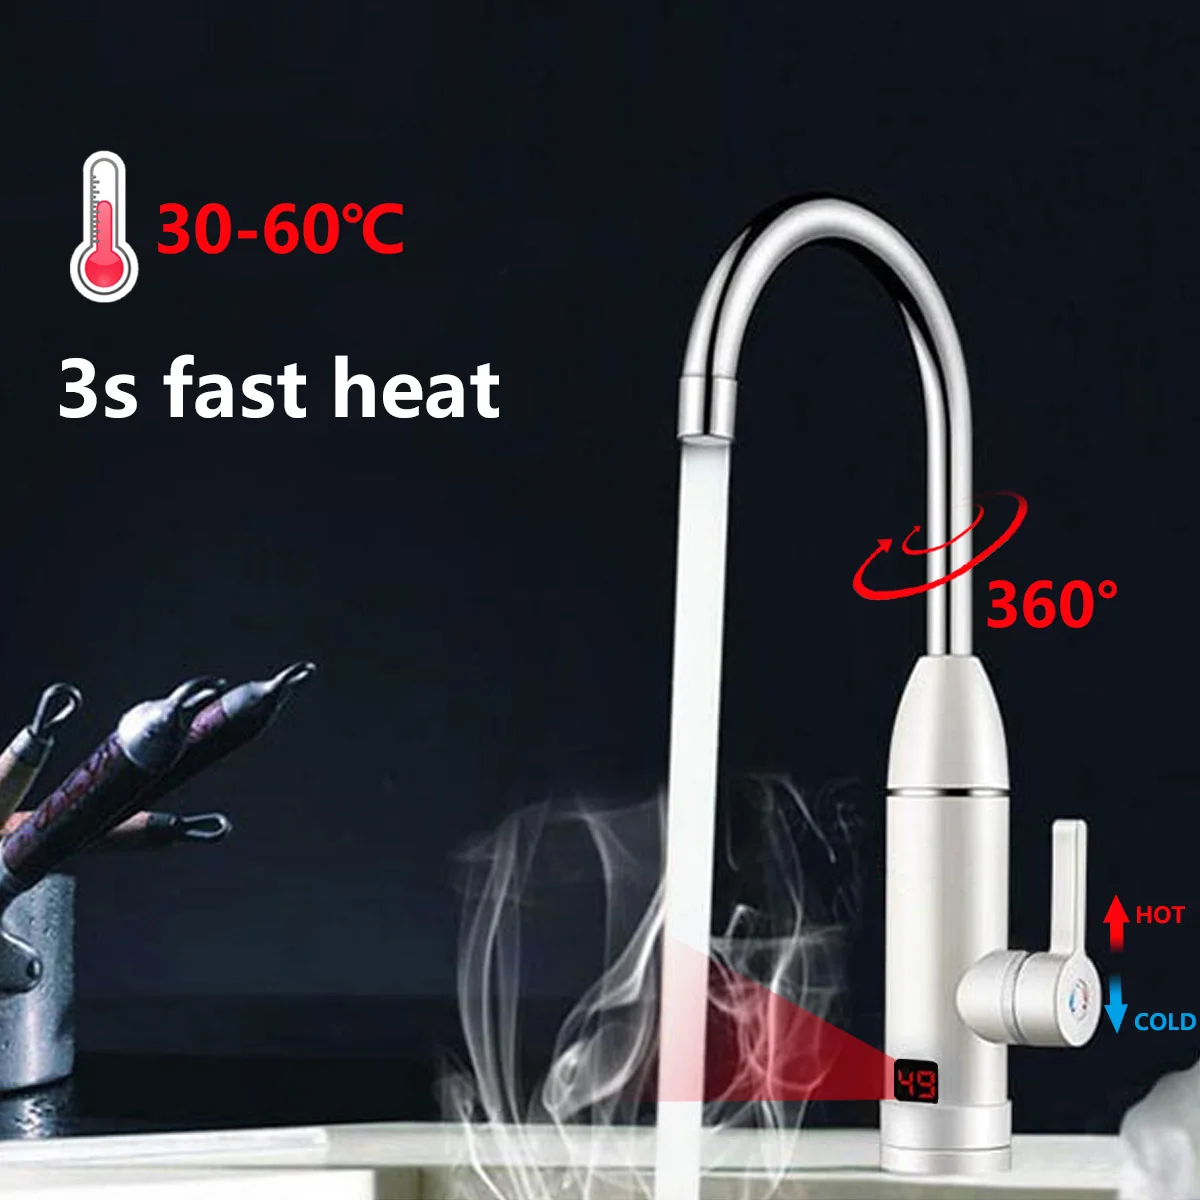 

220V Electric Kitchen Water Heater Tap 3000WInstant Hot Water Faucet Heater Heating Faucet Tankless Instantaneous Water Heater